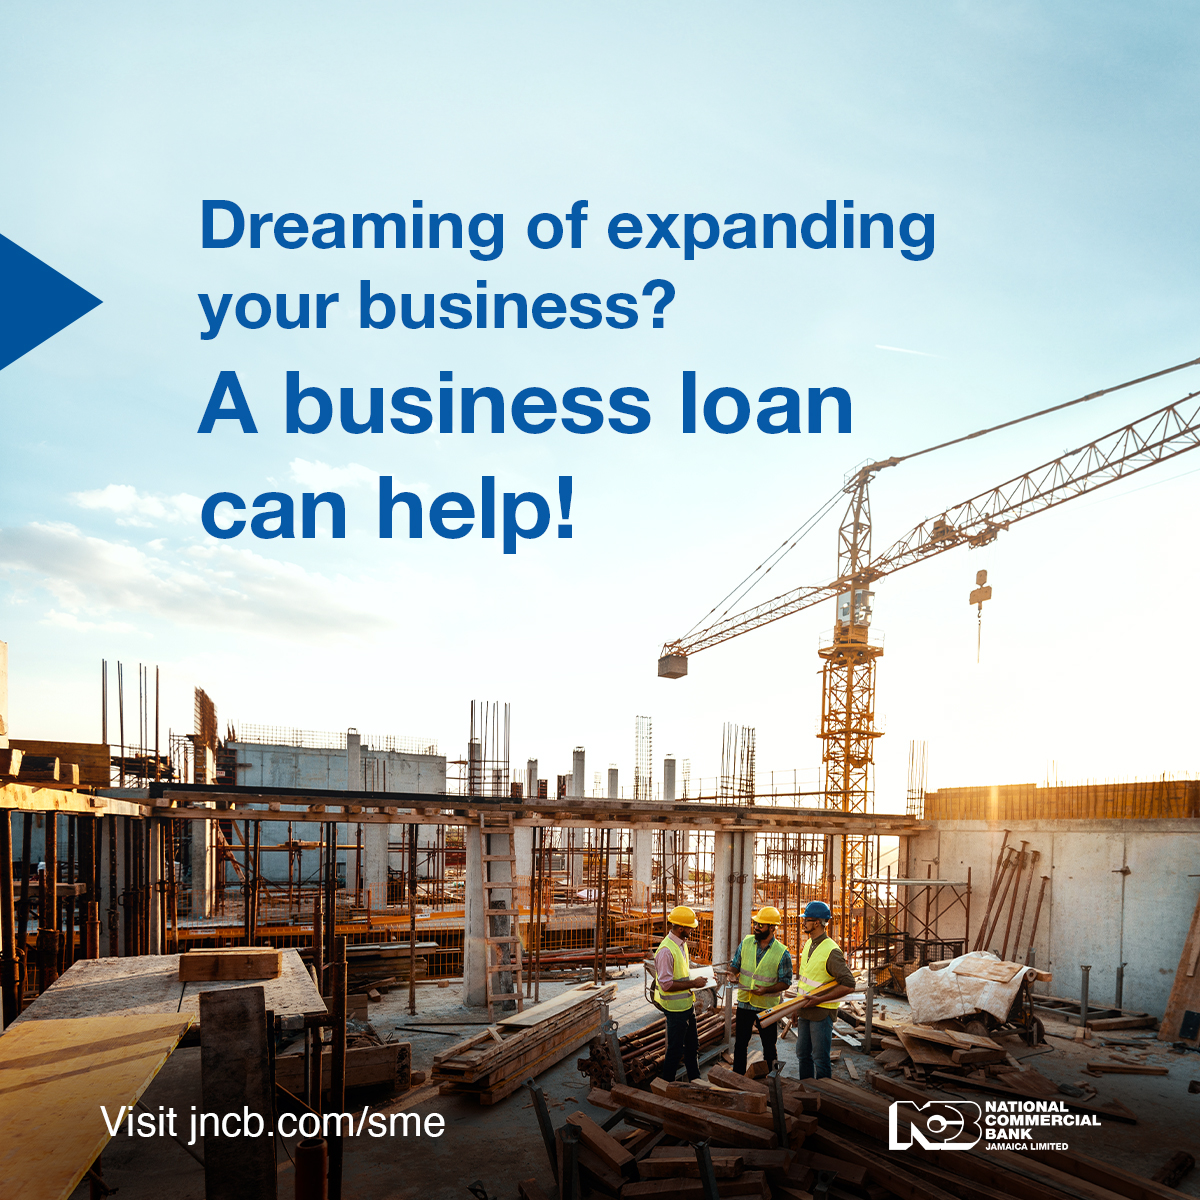 Ready to take your business to the next level? NCB offers flexible business loans to help you make your dreams a reality! Visit jncb.com/sme and get the support you need today.